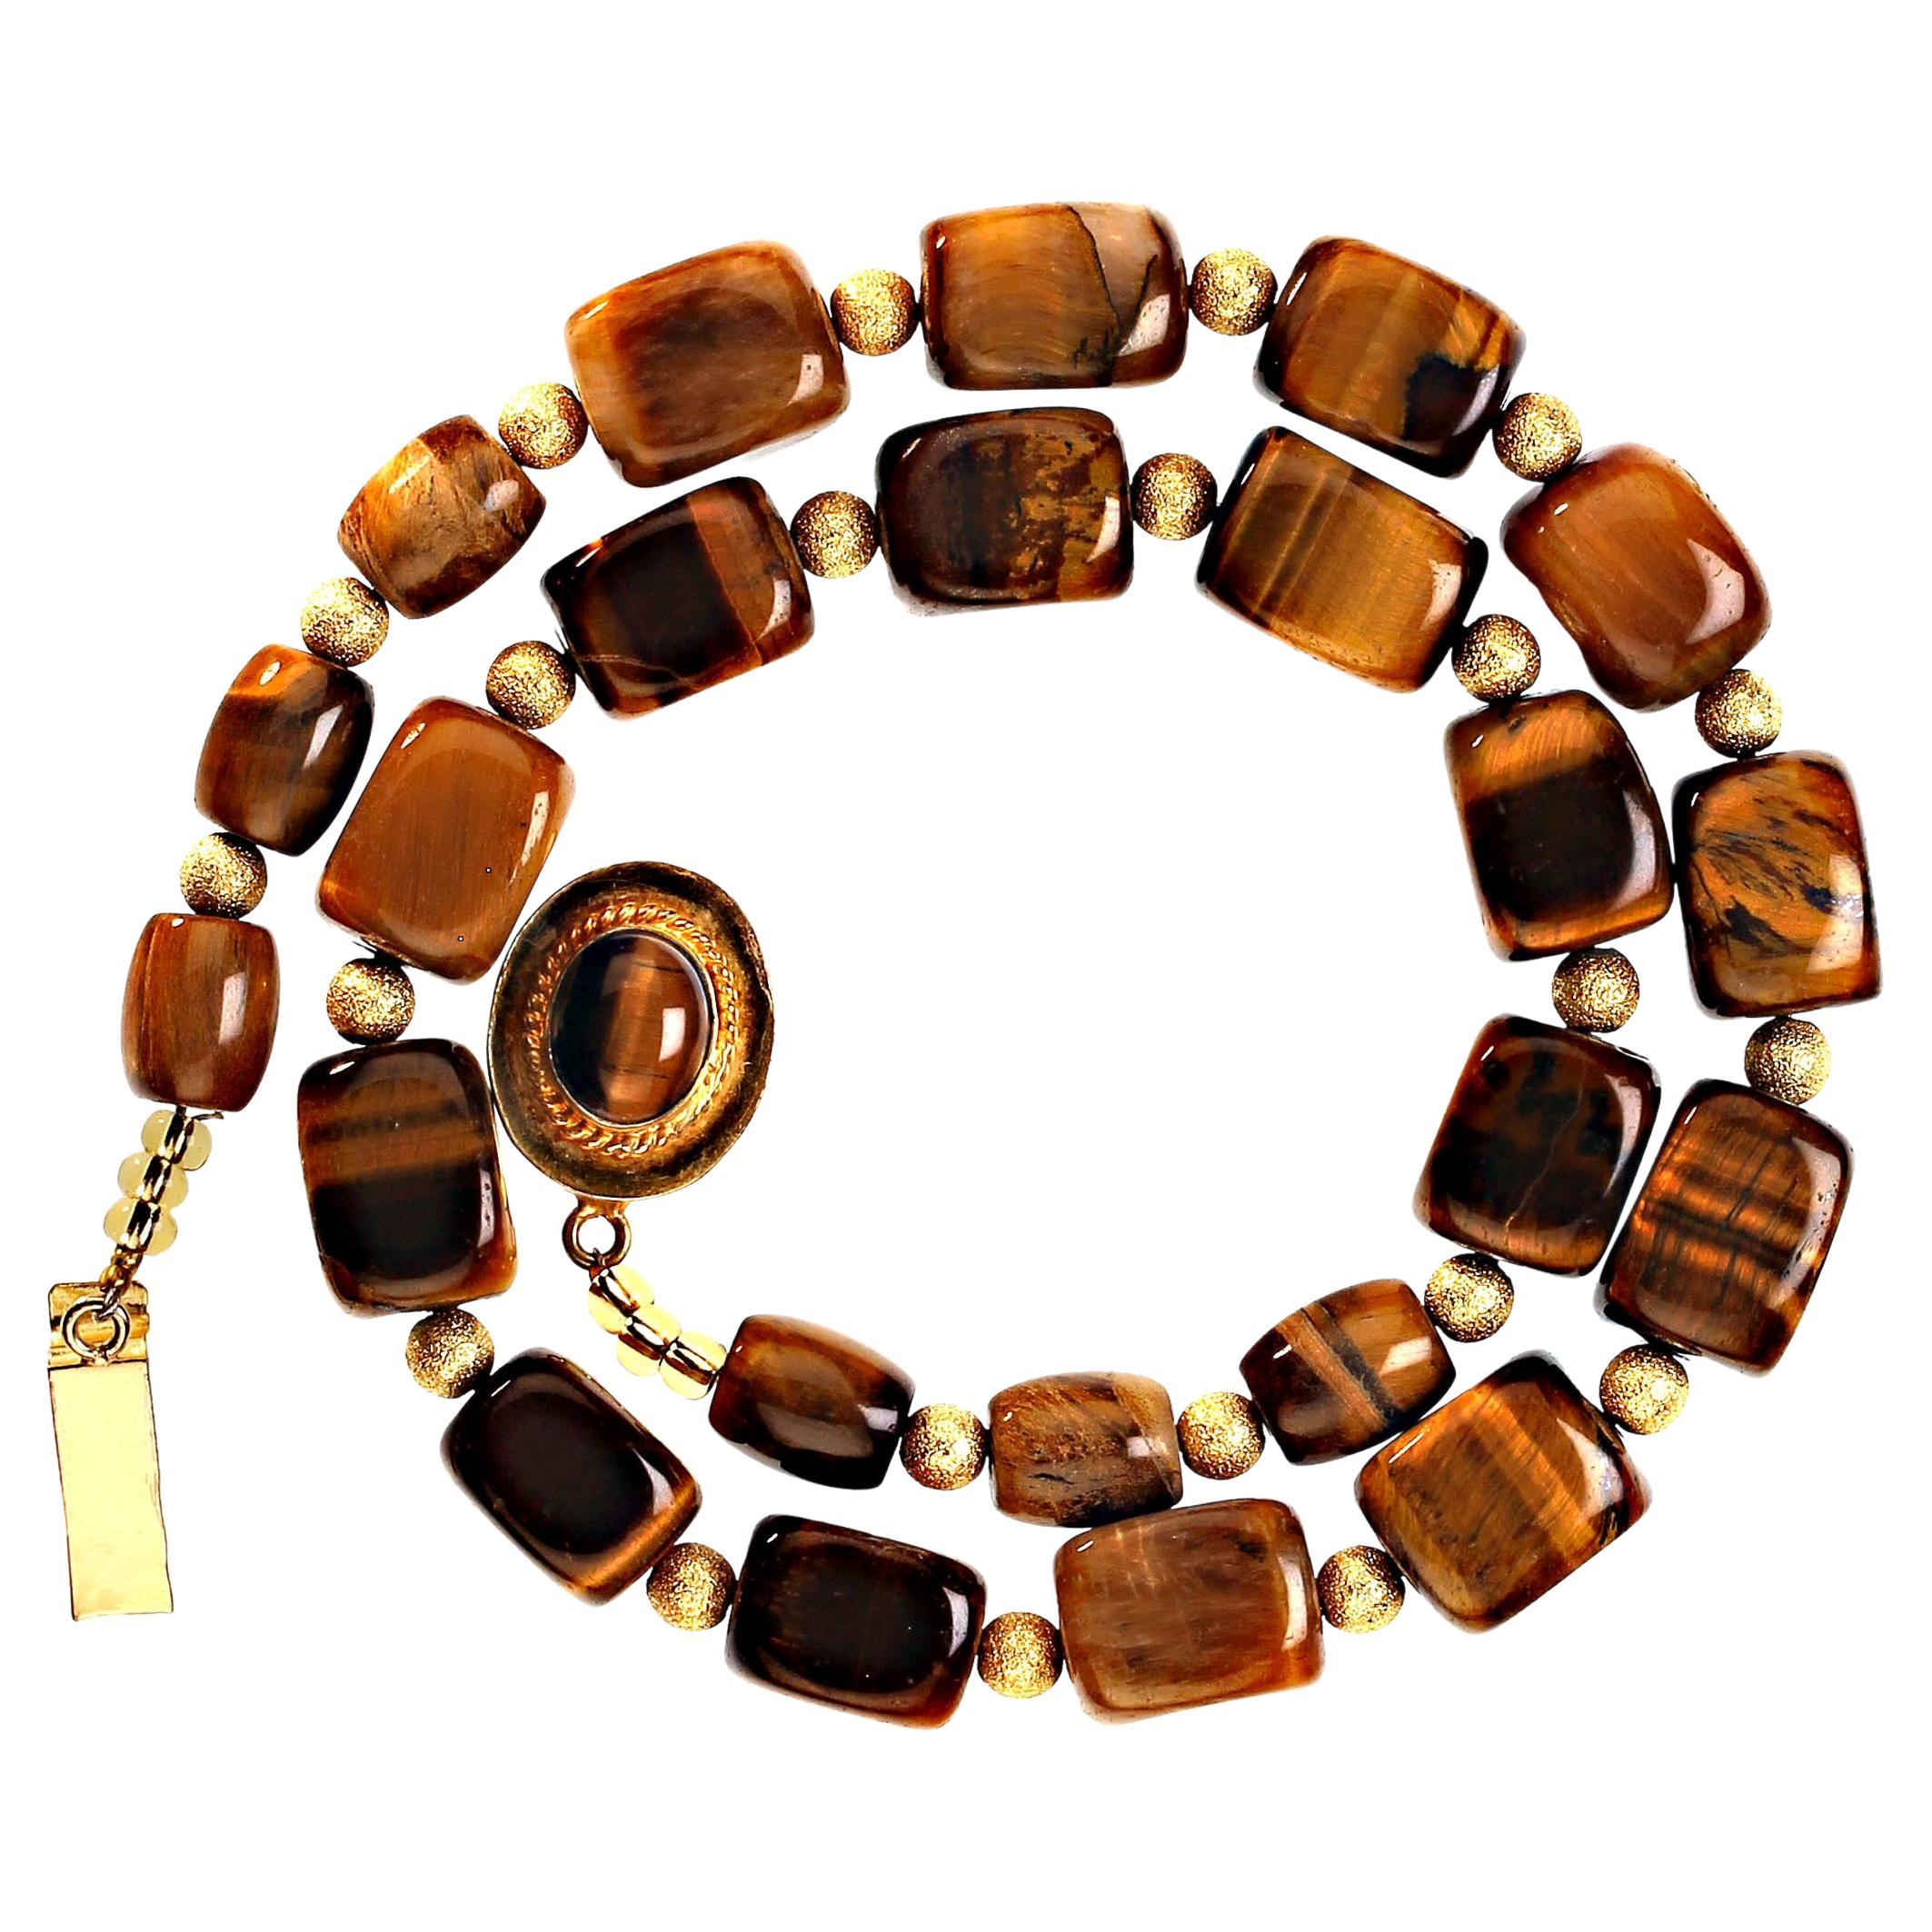 Very Special Necklace of unusual cubes of Tiger's Eye with a lovely chatoyant luster spaced with brushed gold tone spheres. This necklace has an over all length of 20 inches and is finished with a gold tone clasp featuring, of course, a Tiger's Eye